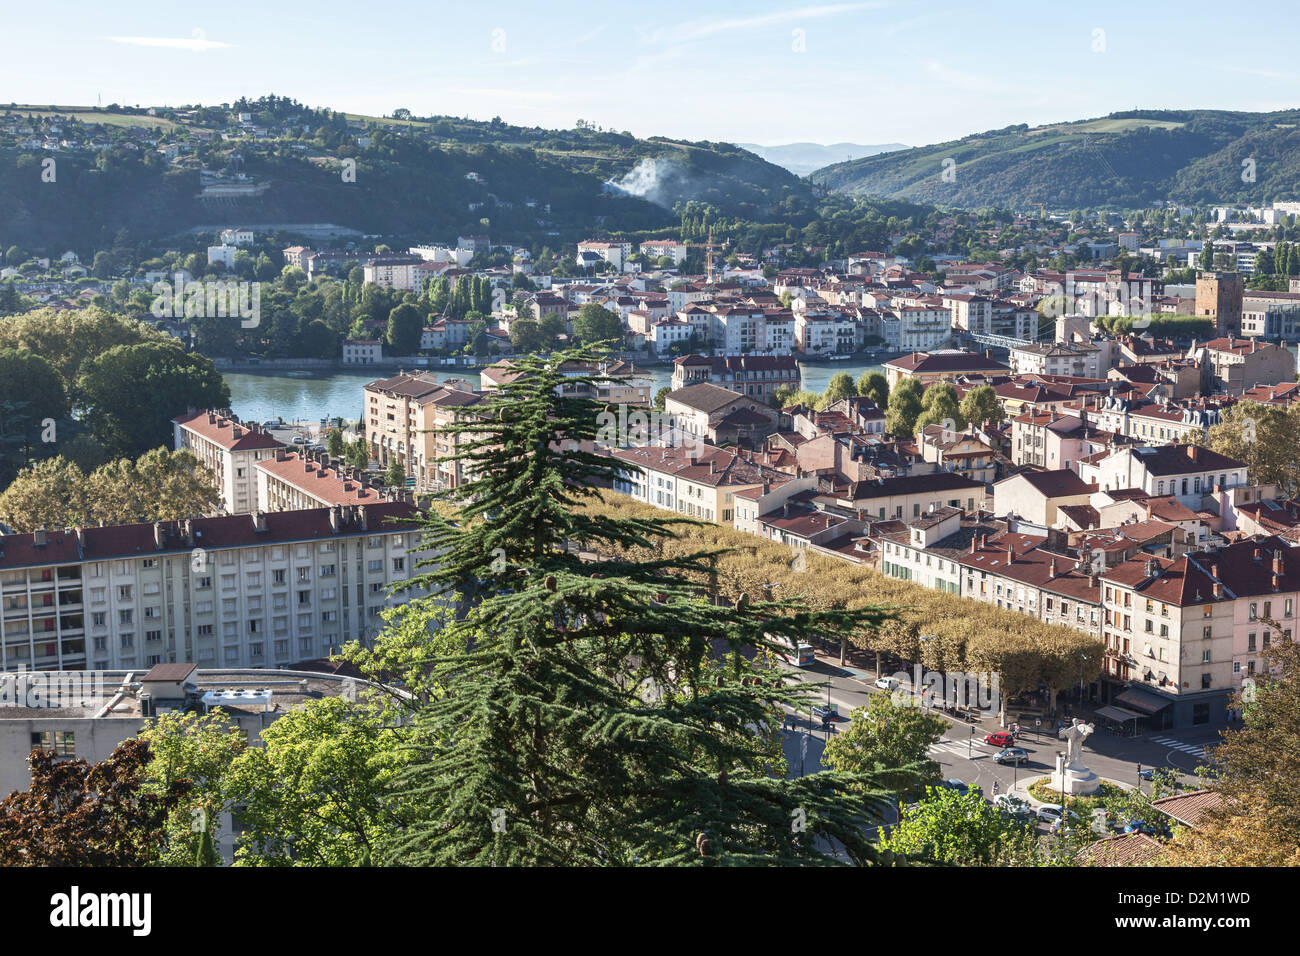 Aerial view of town of Vienne, France Stock Photo - Alamy